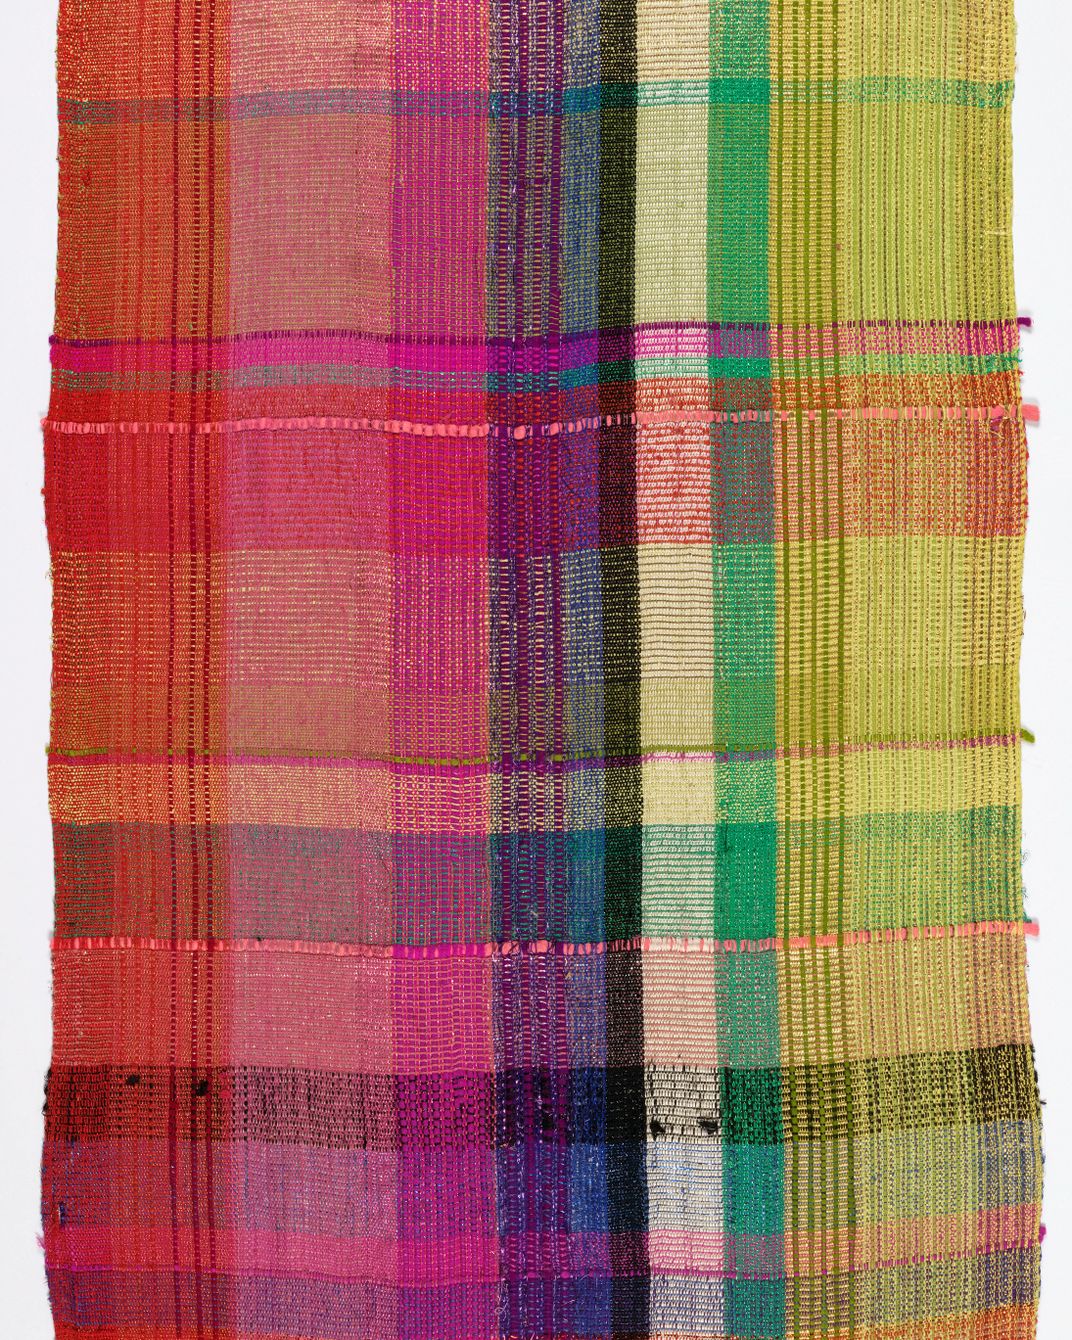 Mexican plaid textile designed by Liebes, circa 1938